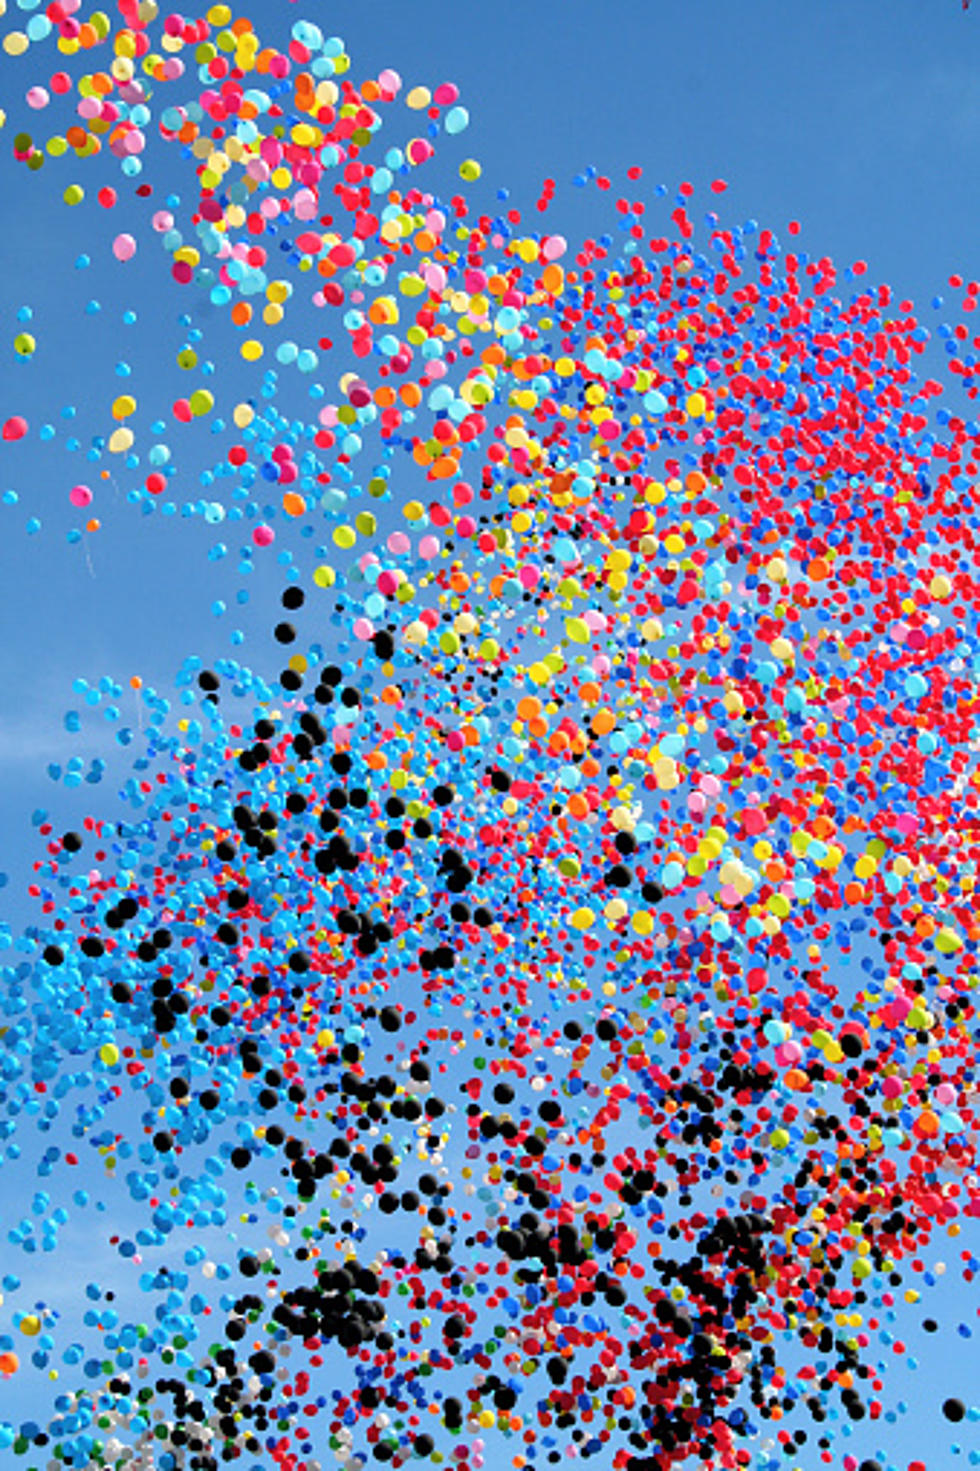 Illinois Considers Law Limiting Amount Of Balloons You Can Release